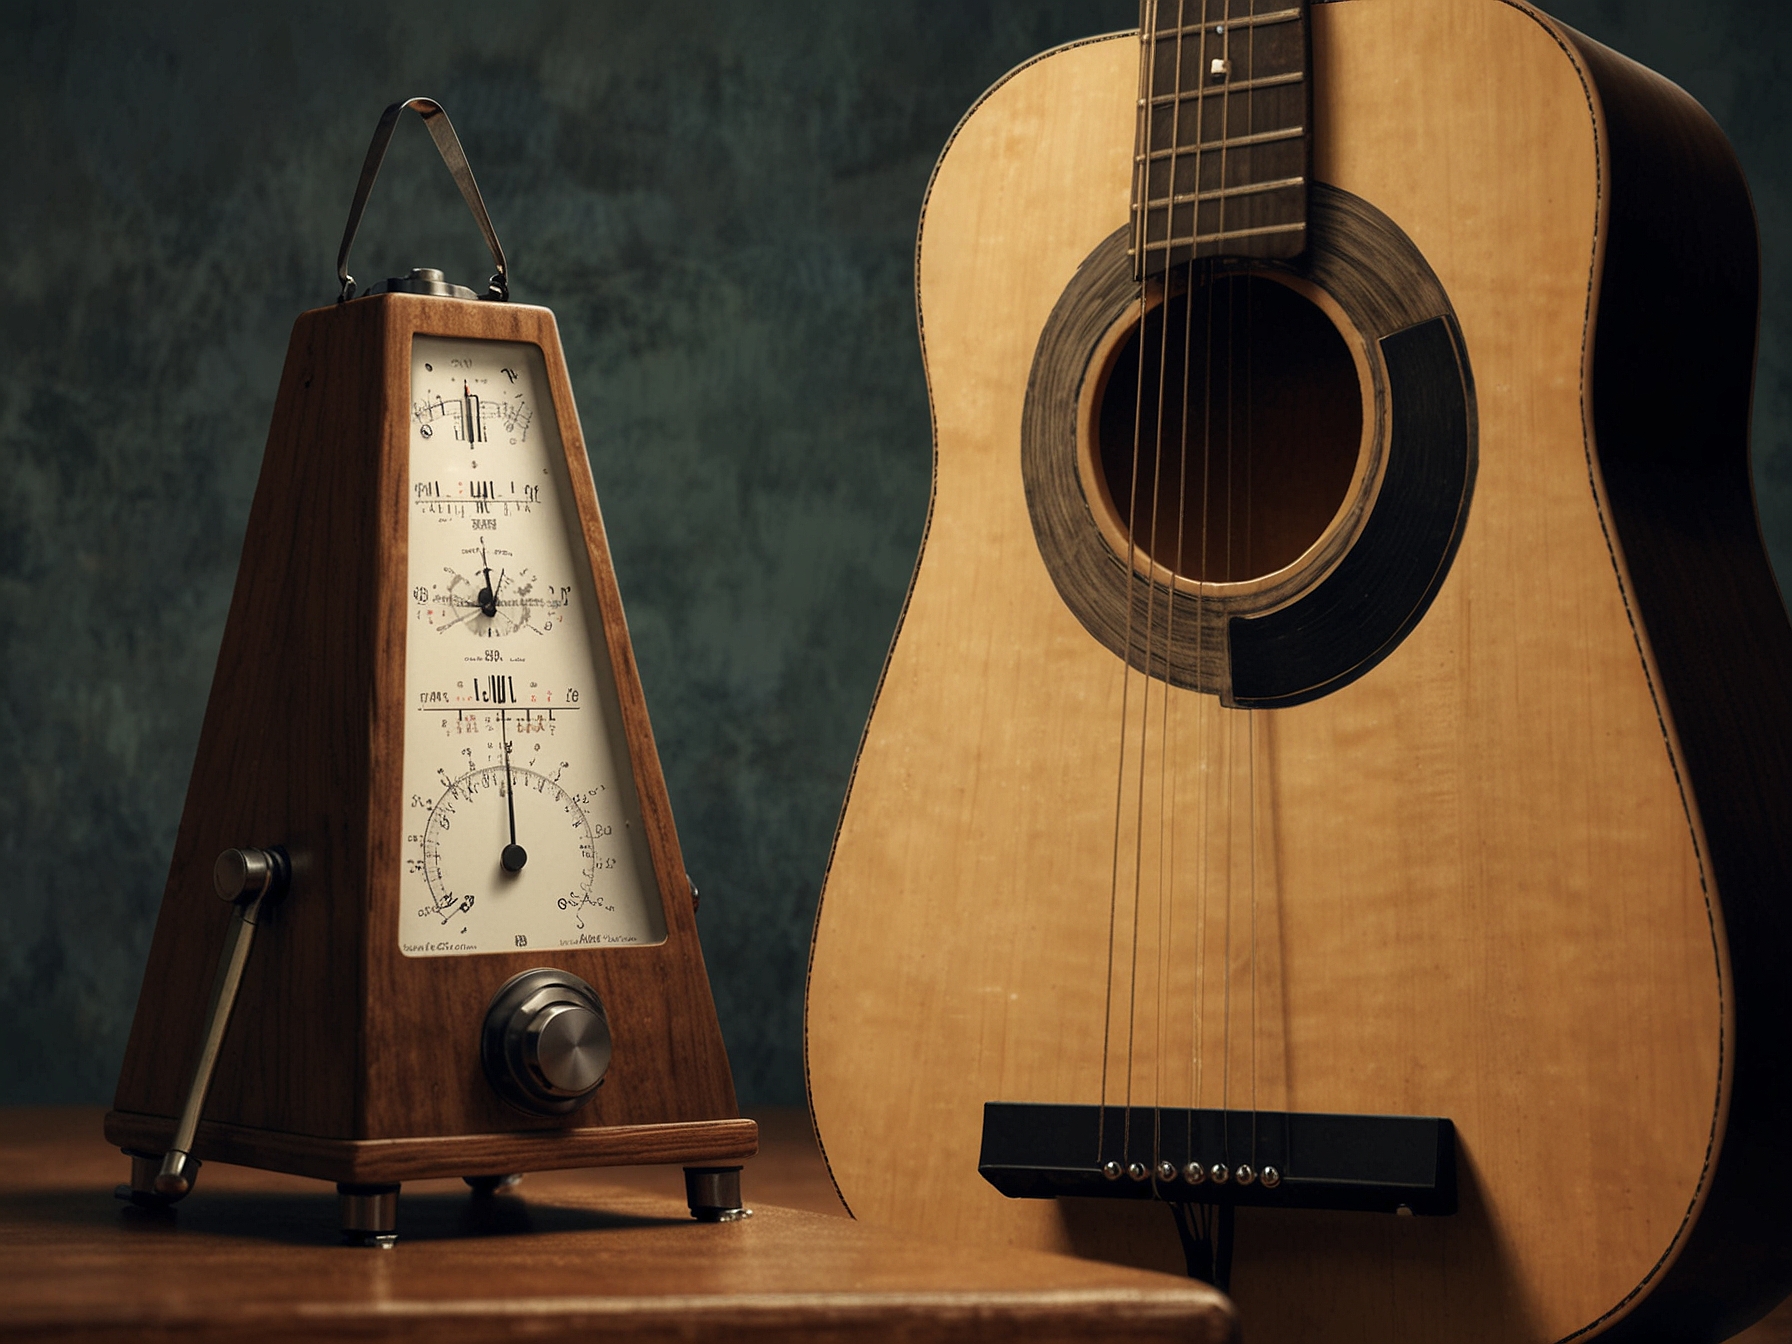 A close-up shot of a metronome set at a slow tempo next to an acoustic guitar, emphasizing the importance of starting the spider exercise at a comfortable speed for accuracy and precision.